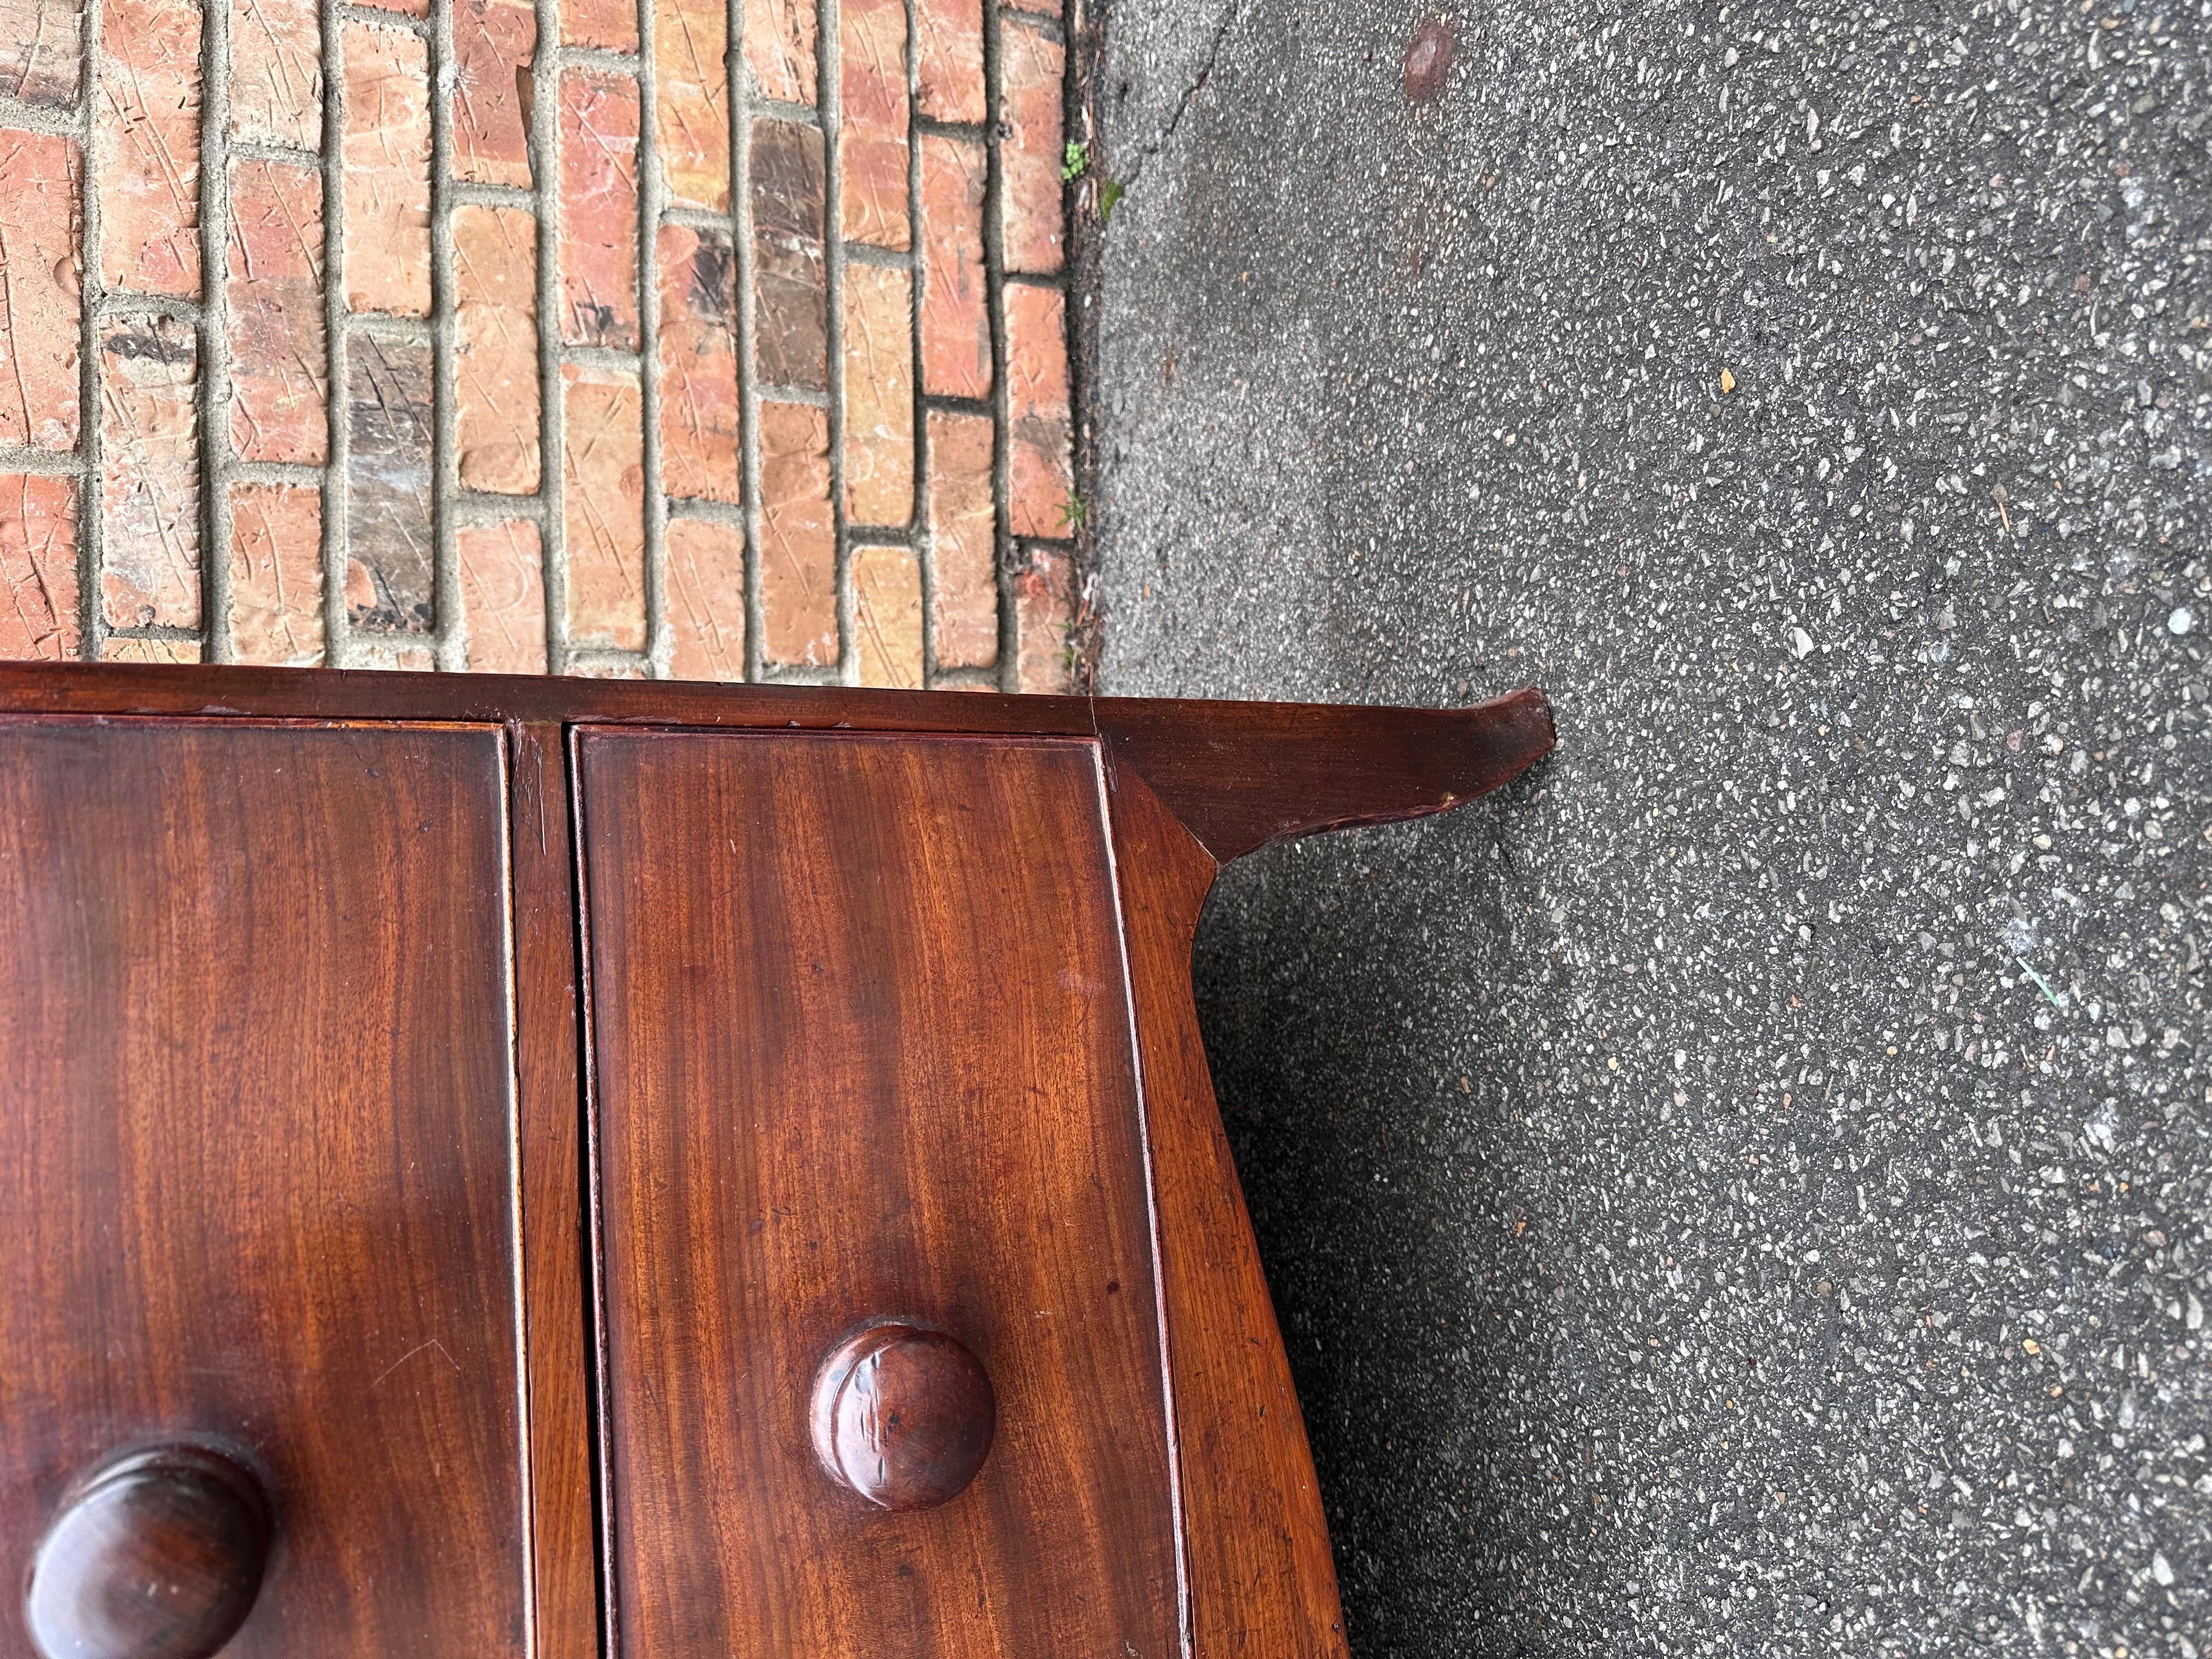 This is a beautiful mid 19th century English Bowfront, chest with original pulls in the traditional darker tone. Two small drawers over three larger one that all slide perfectly. The wood is a flamed mahogany more of a brown tone than a red like